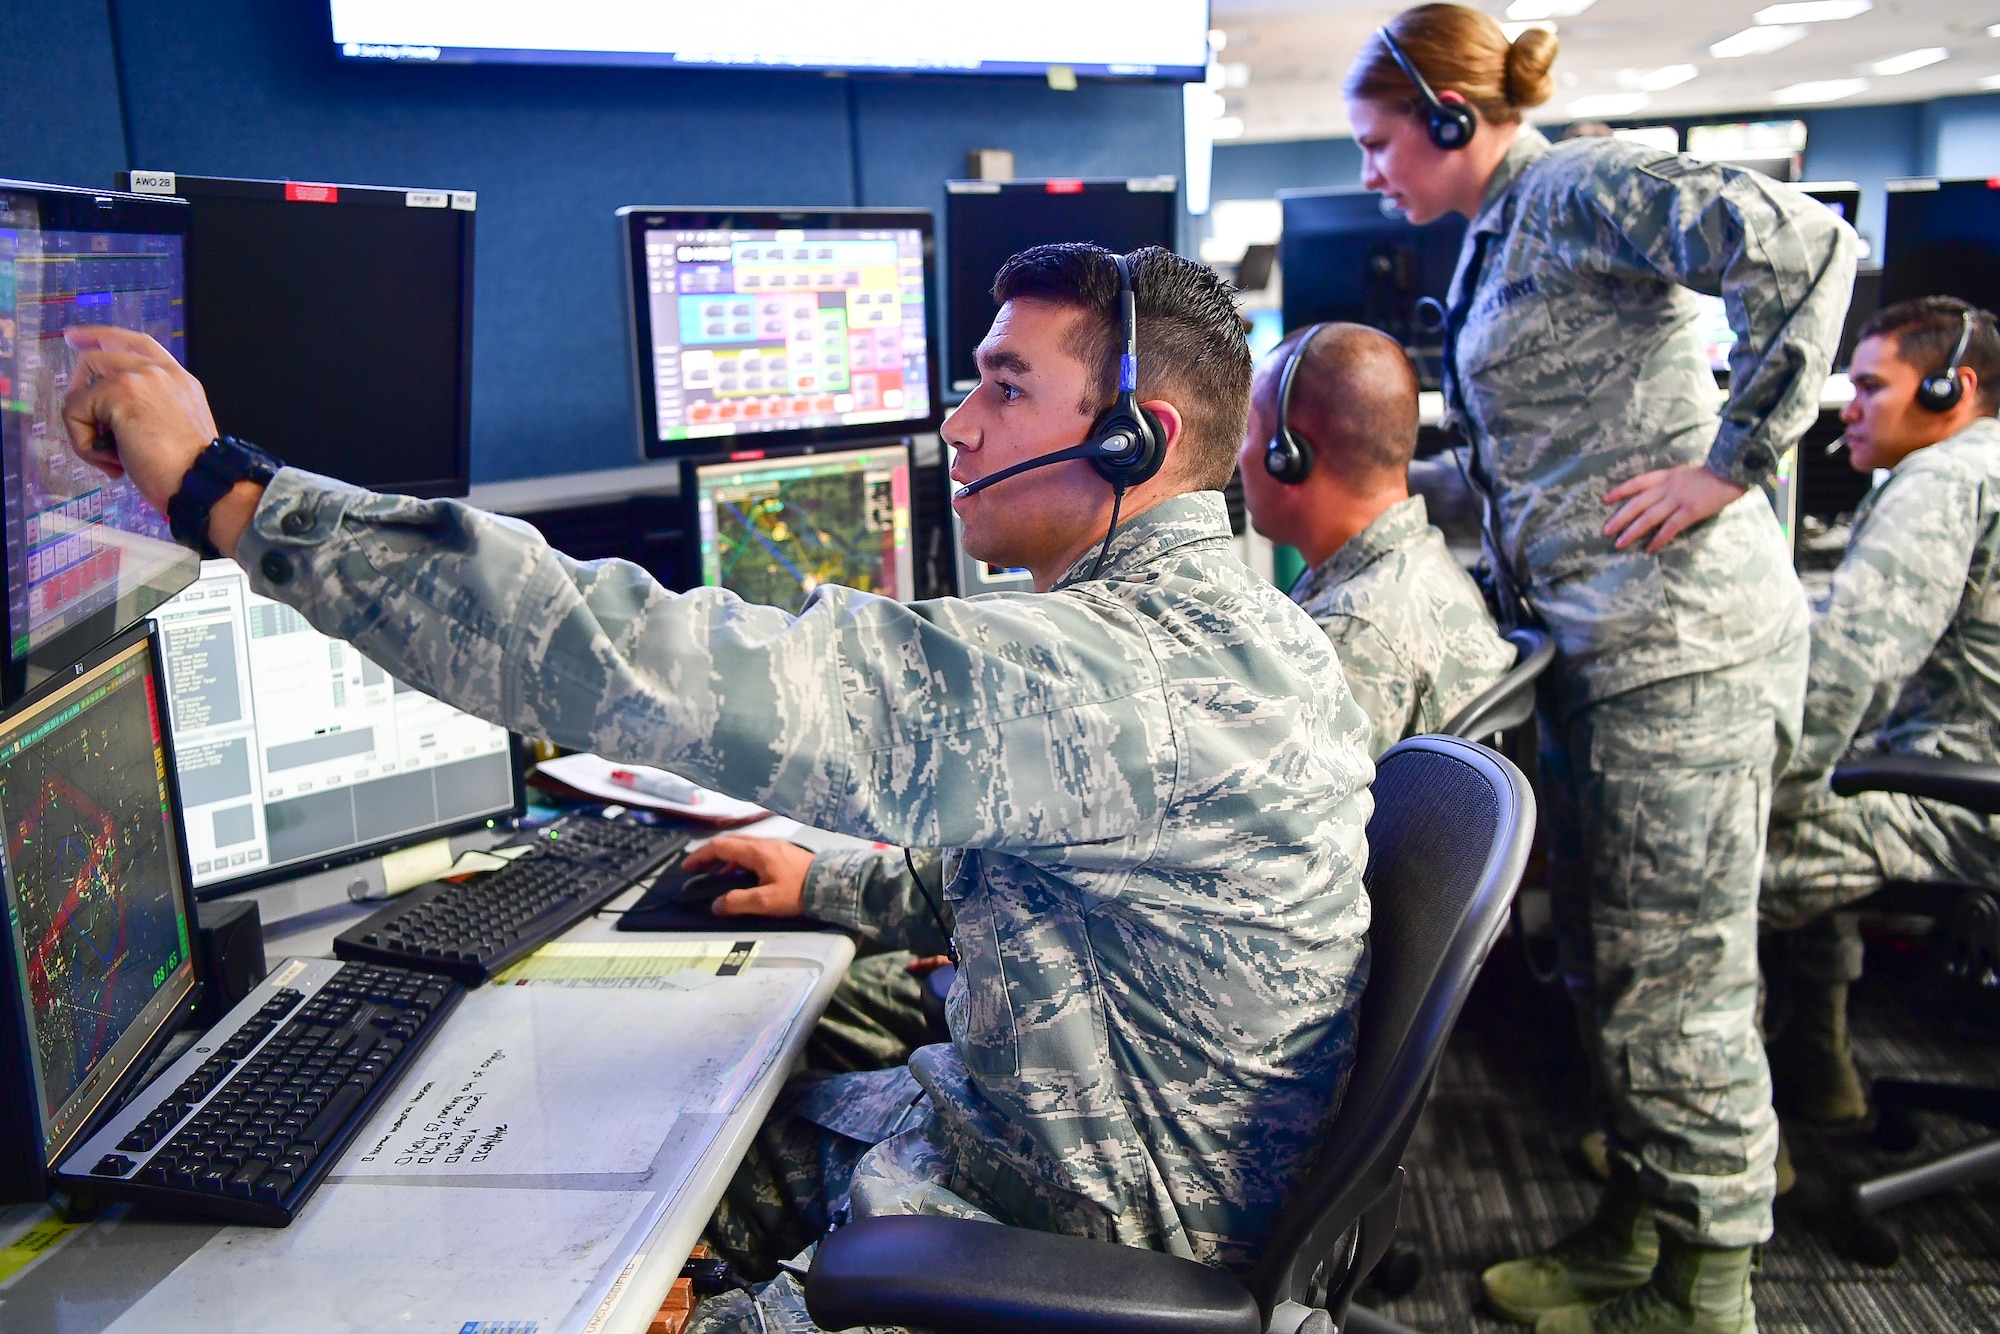 The WADS team of Capt. Nicholas Rhodes (from left to right), Maj. Matthew Horrocks, Staff Sgt. Kayla Sharpe, and Capt. Gregory Firestone coordinate expeditiously with an orbiting AWACS aircraft and joint terminal attack controllers on the ground to assist with aviation rescue of  victims of Hurricane Harvey in areas surrounding Houston, Texas.